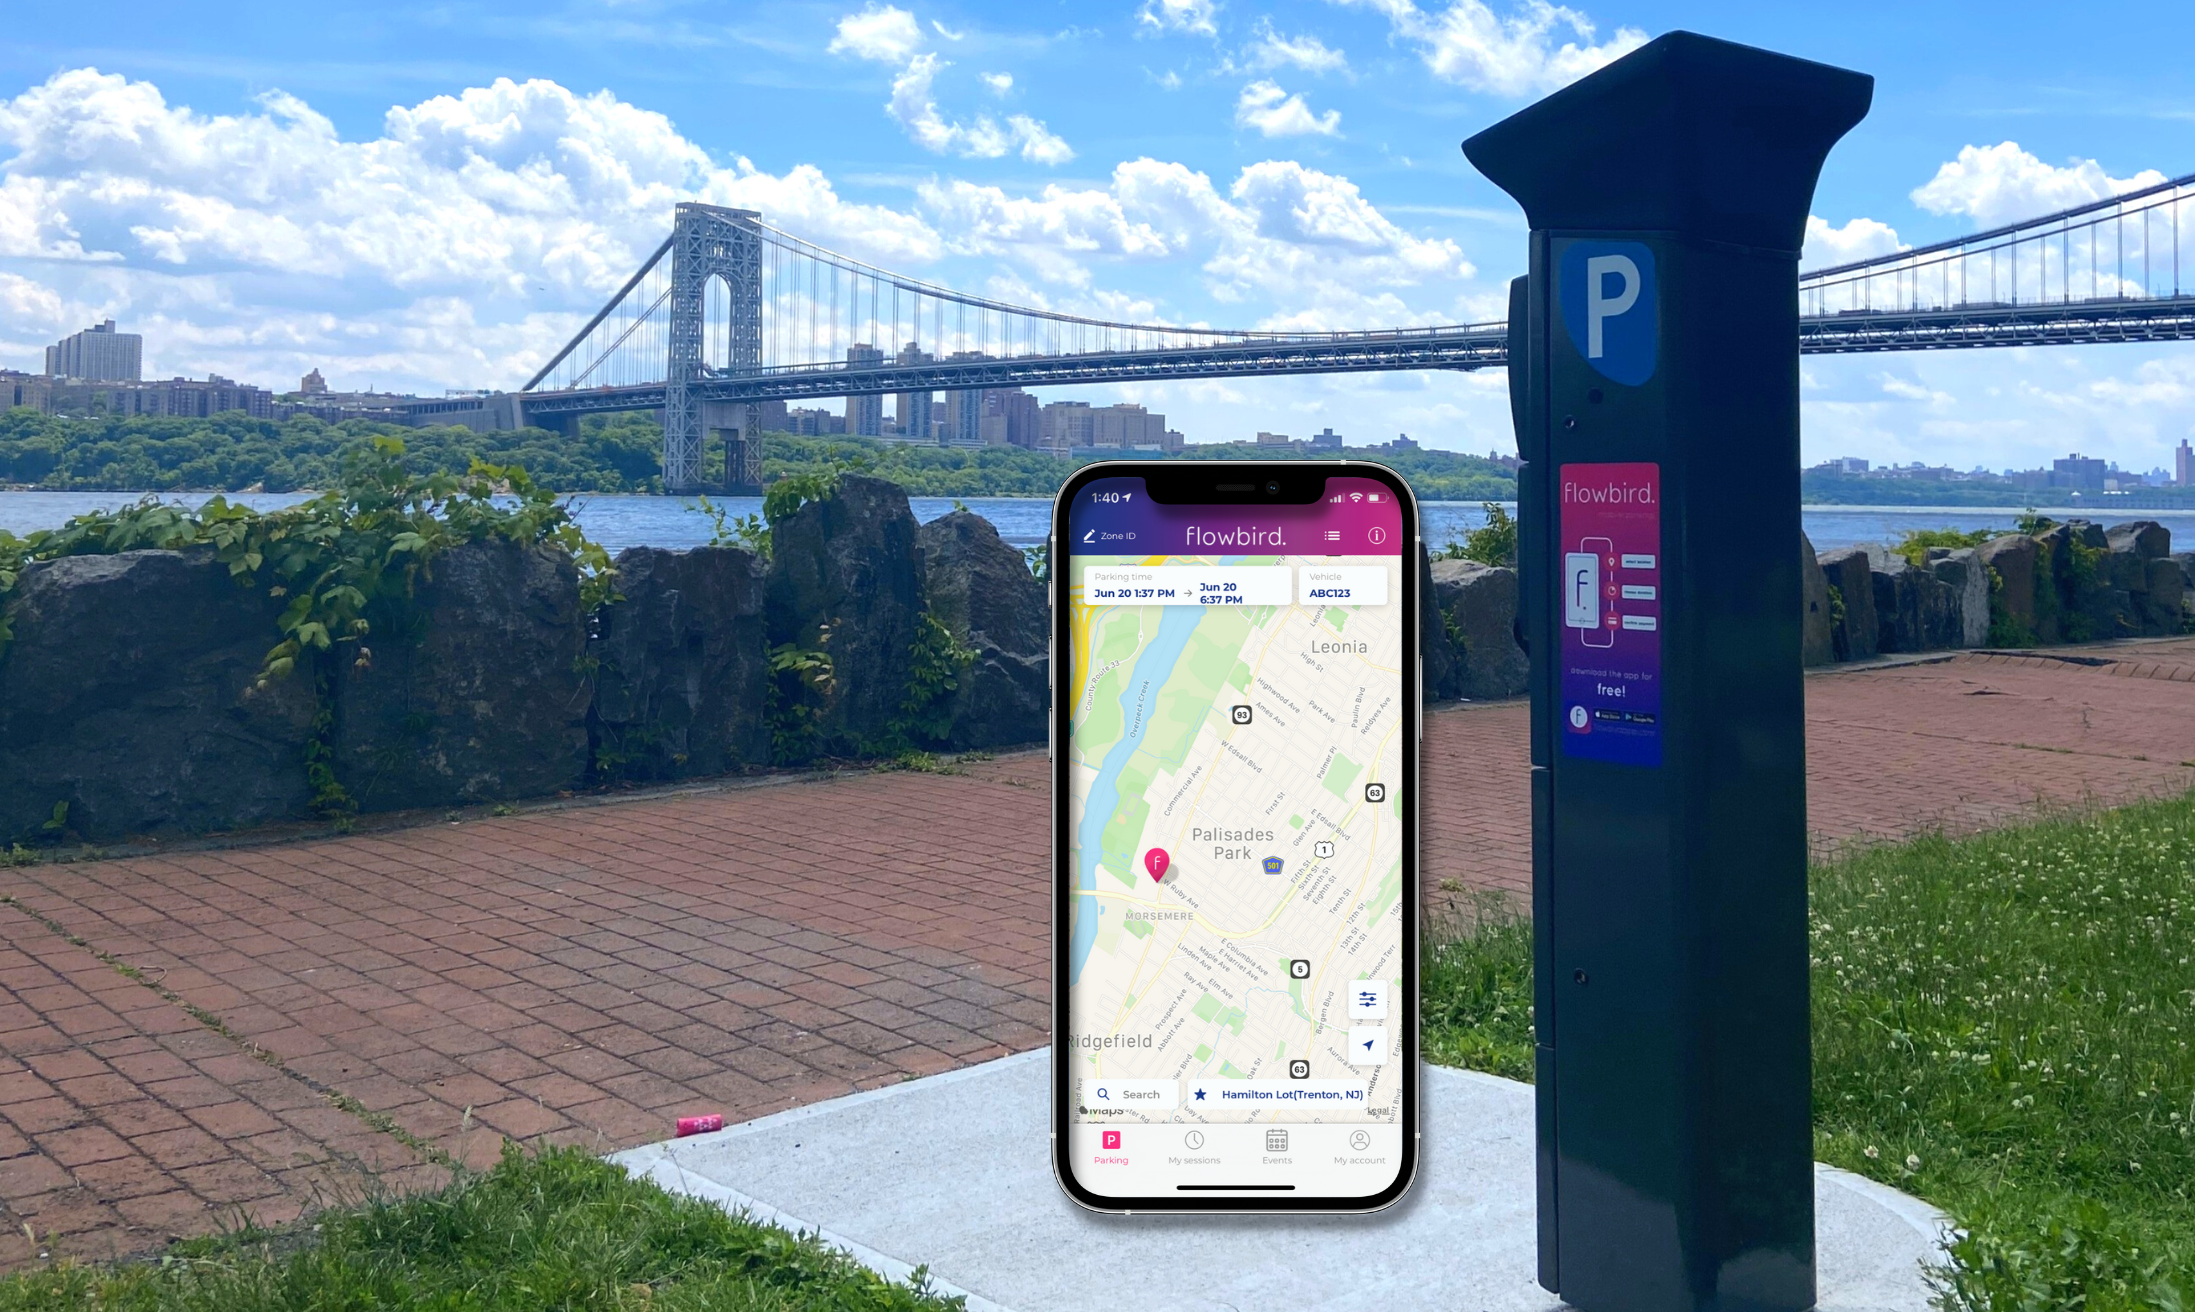 Flowbird Group has announced the deployment of an integrated fee collection system for Palisades Interstate Park Commission